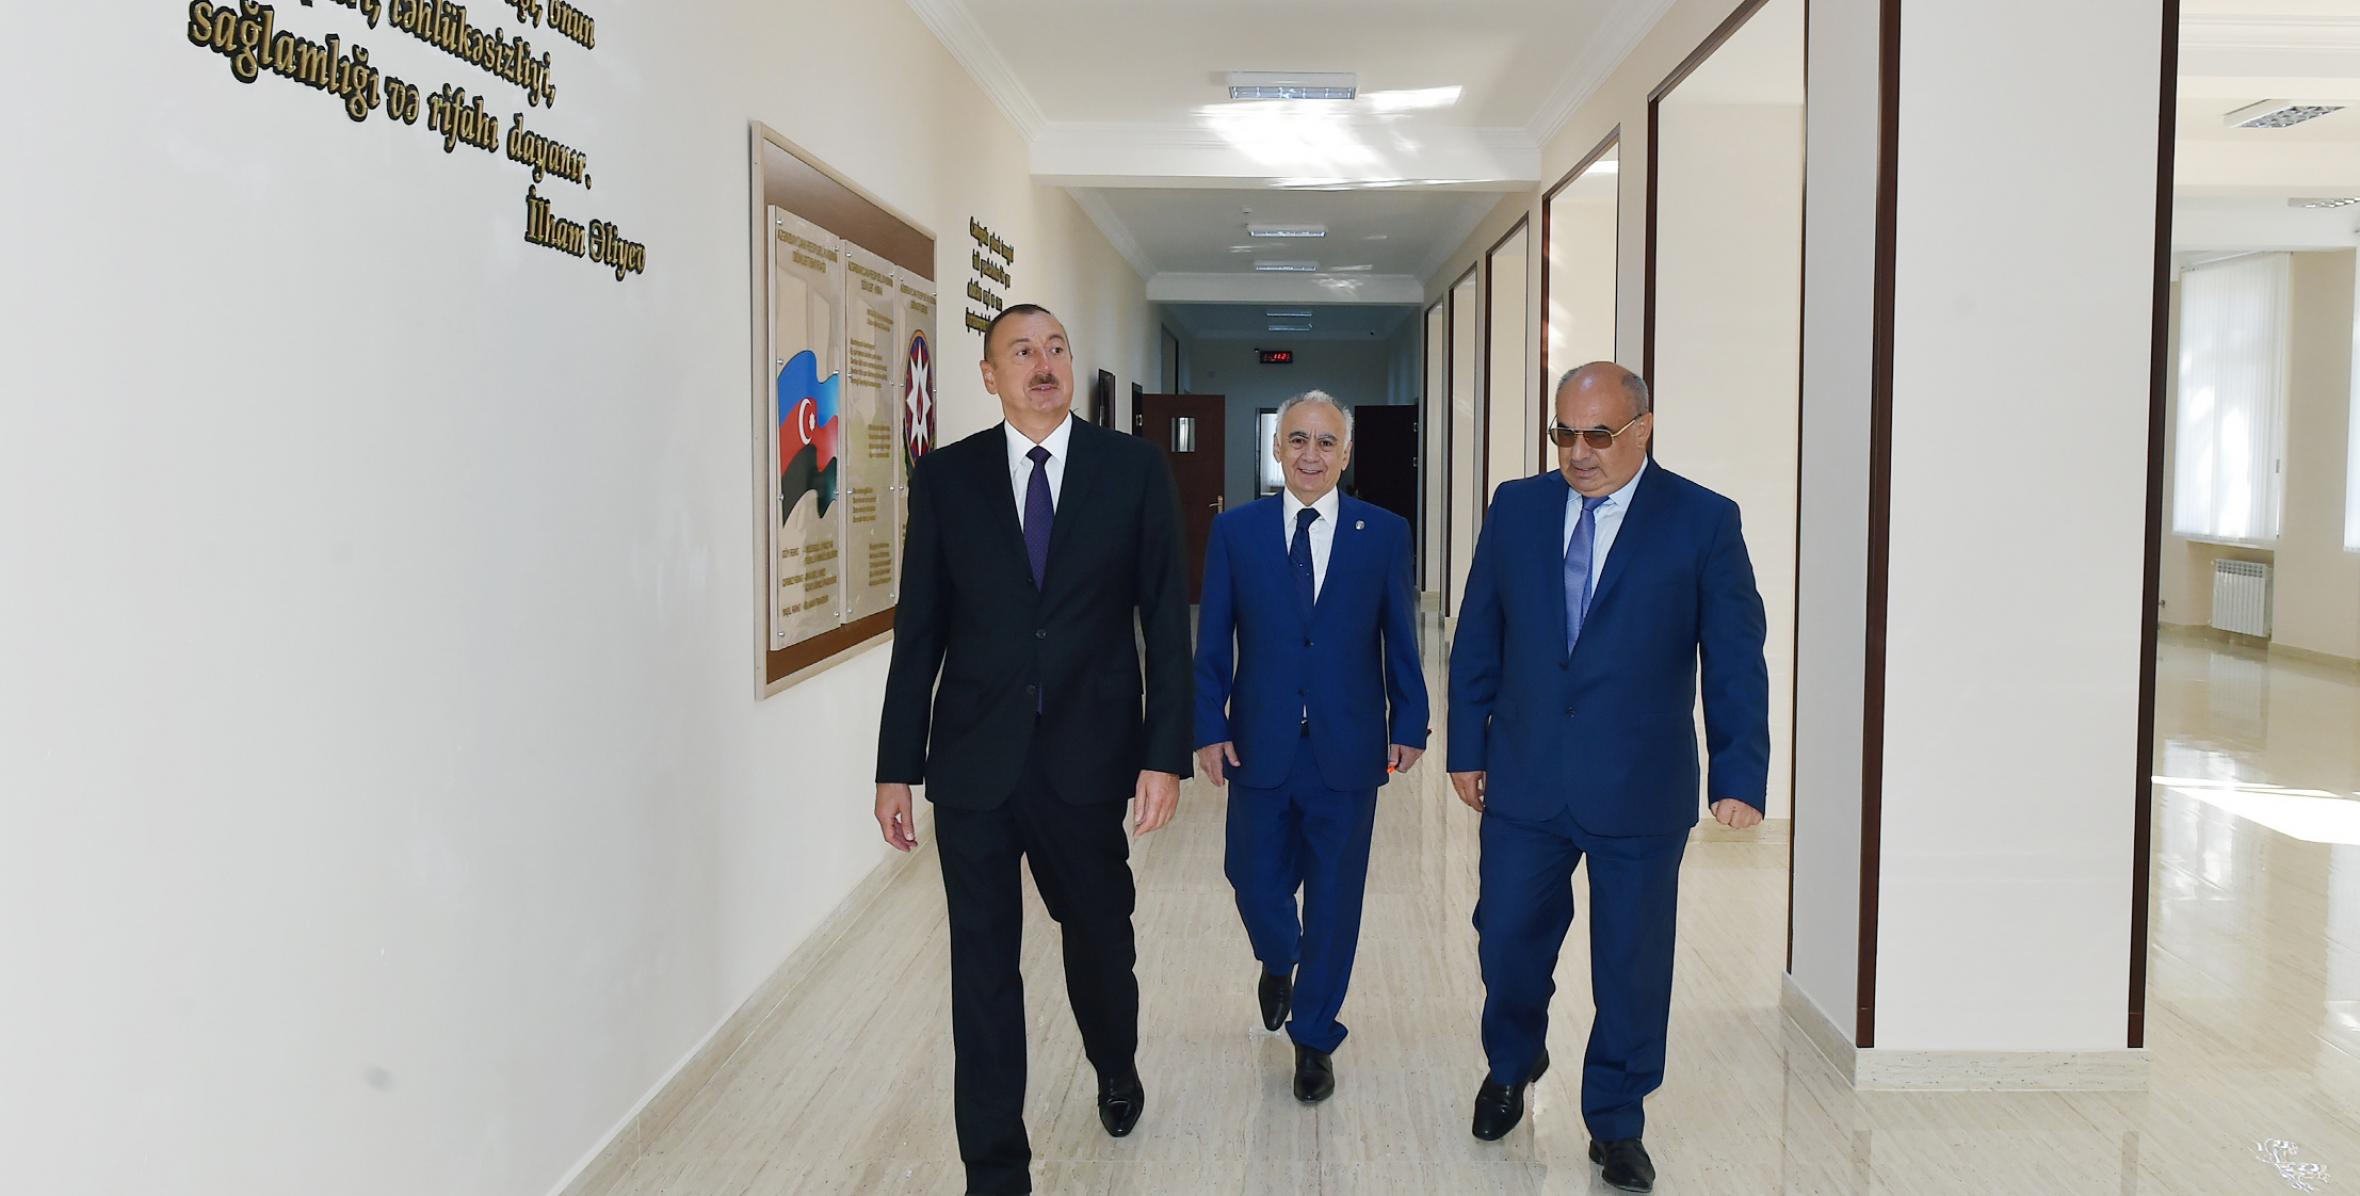 Ilham Aliyev reviewed a physics, mathematical and informatics lyceum in Baku after major overhaul